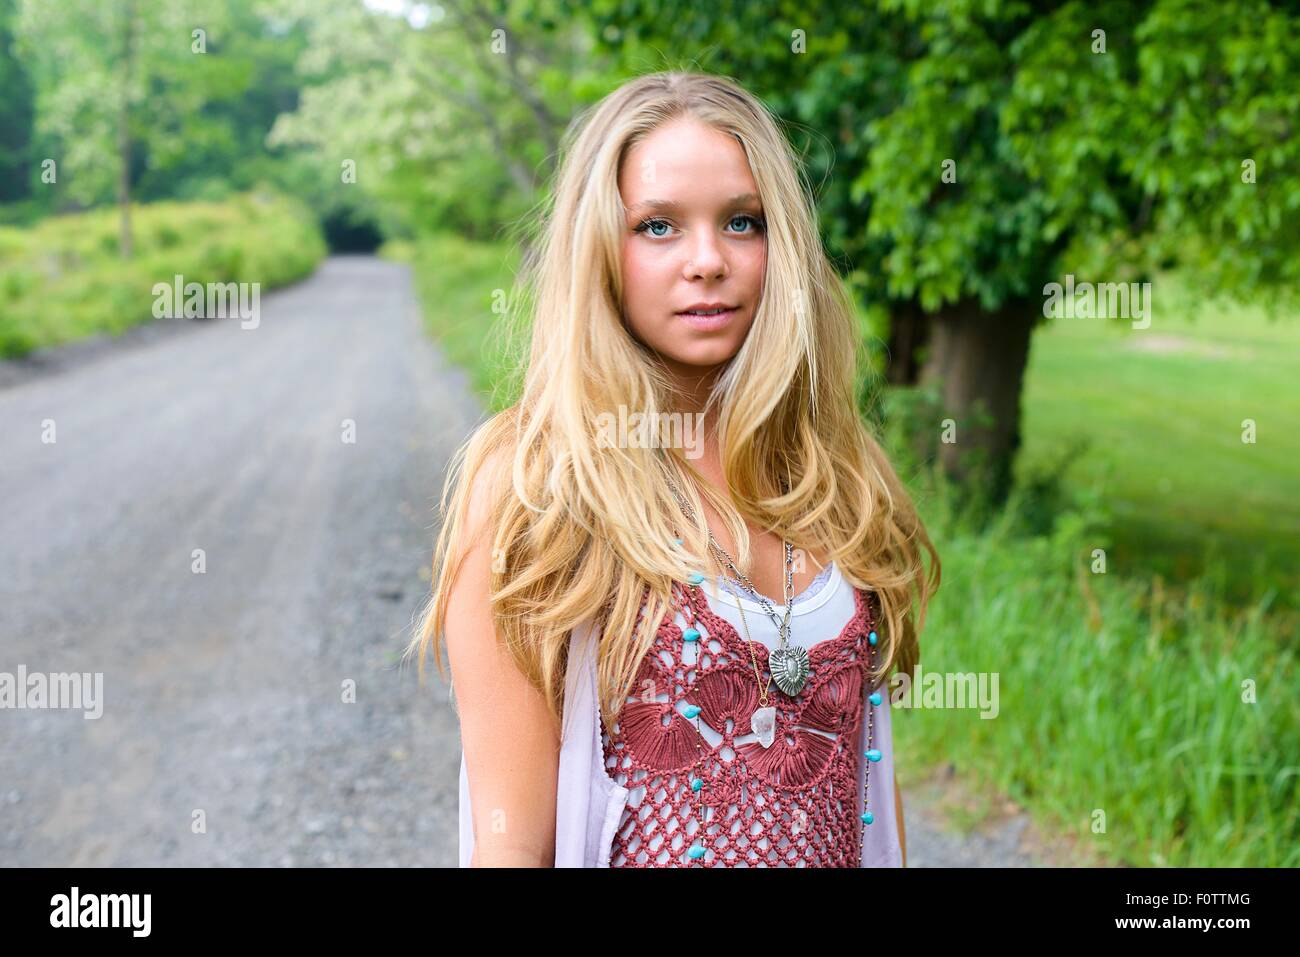 Portrait of fashionable young woman on rural road Stock Photo